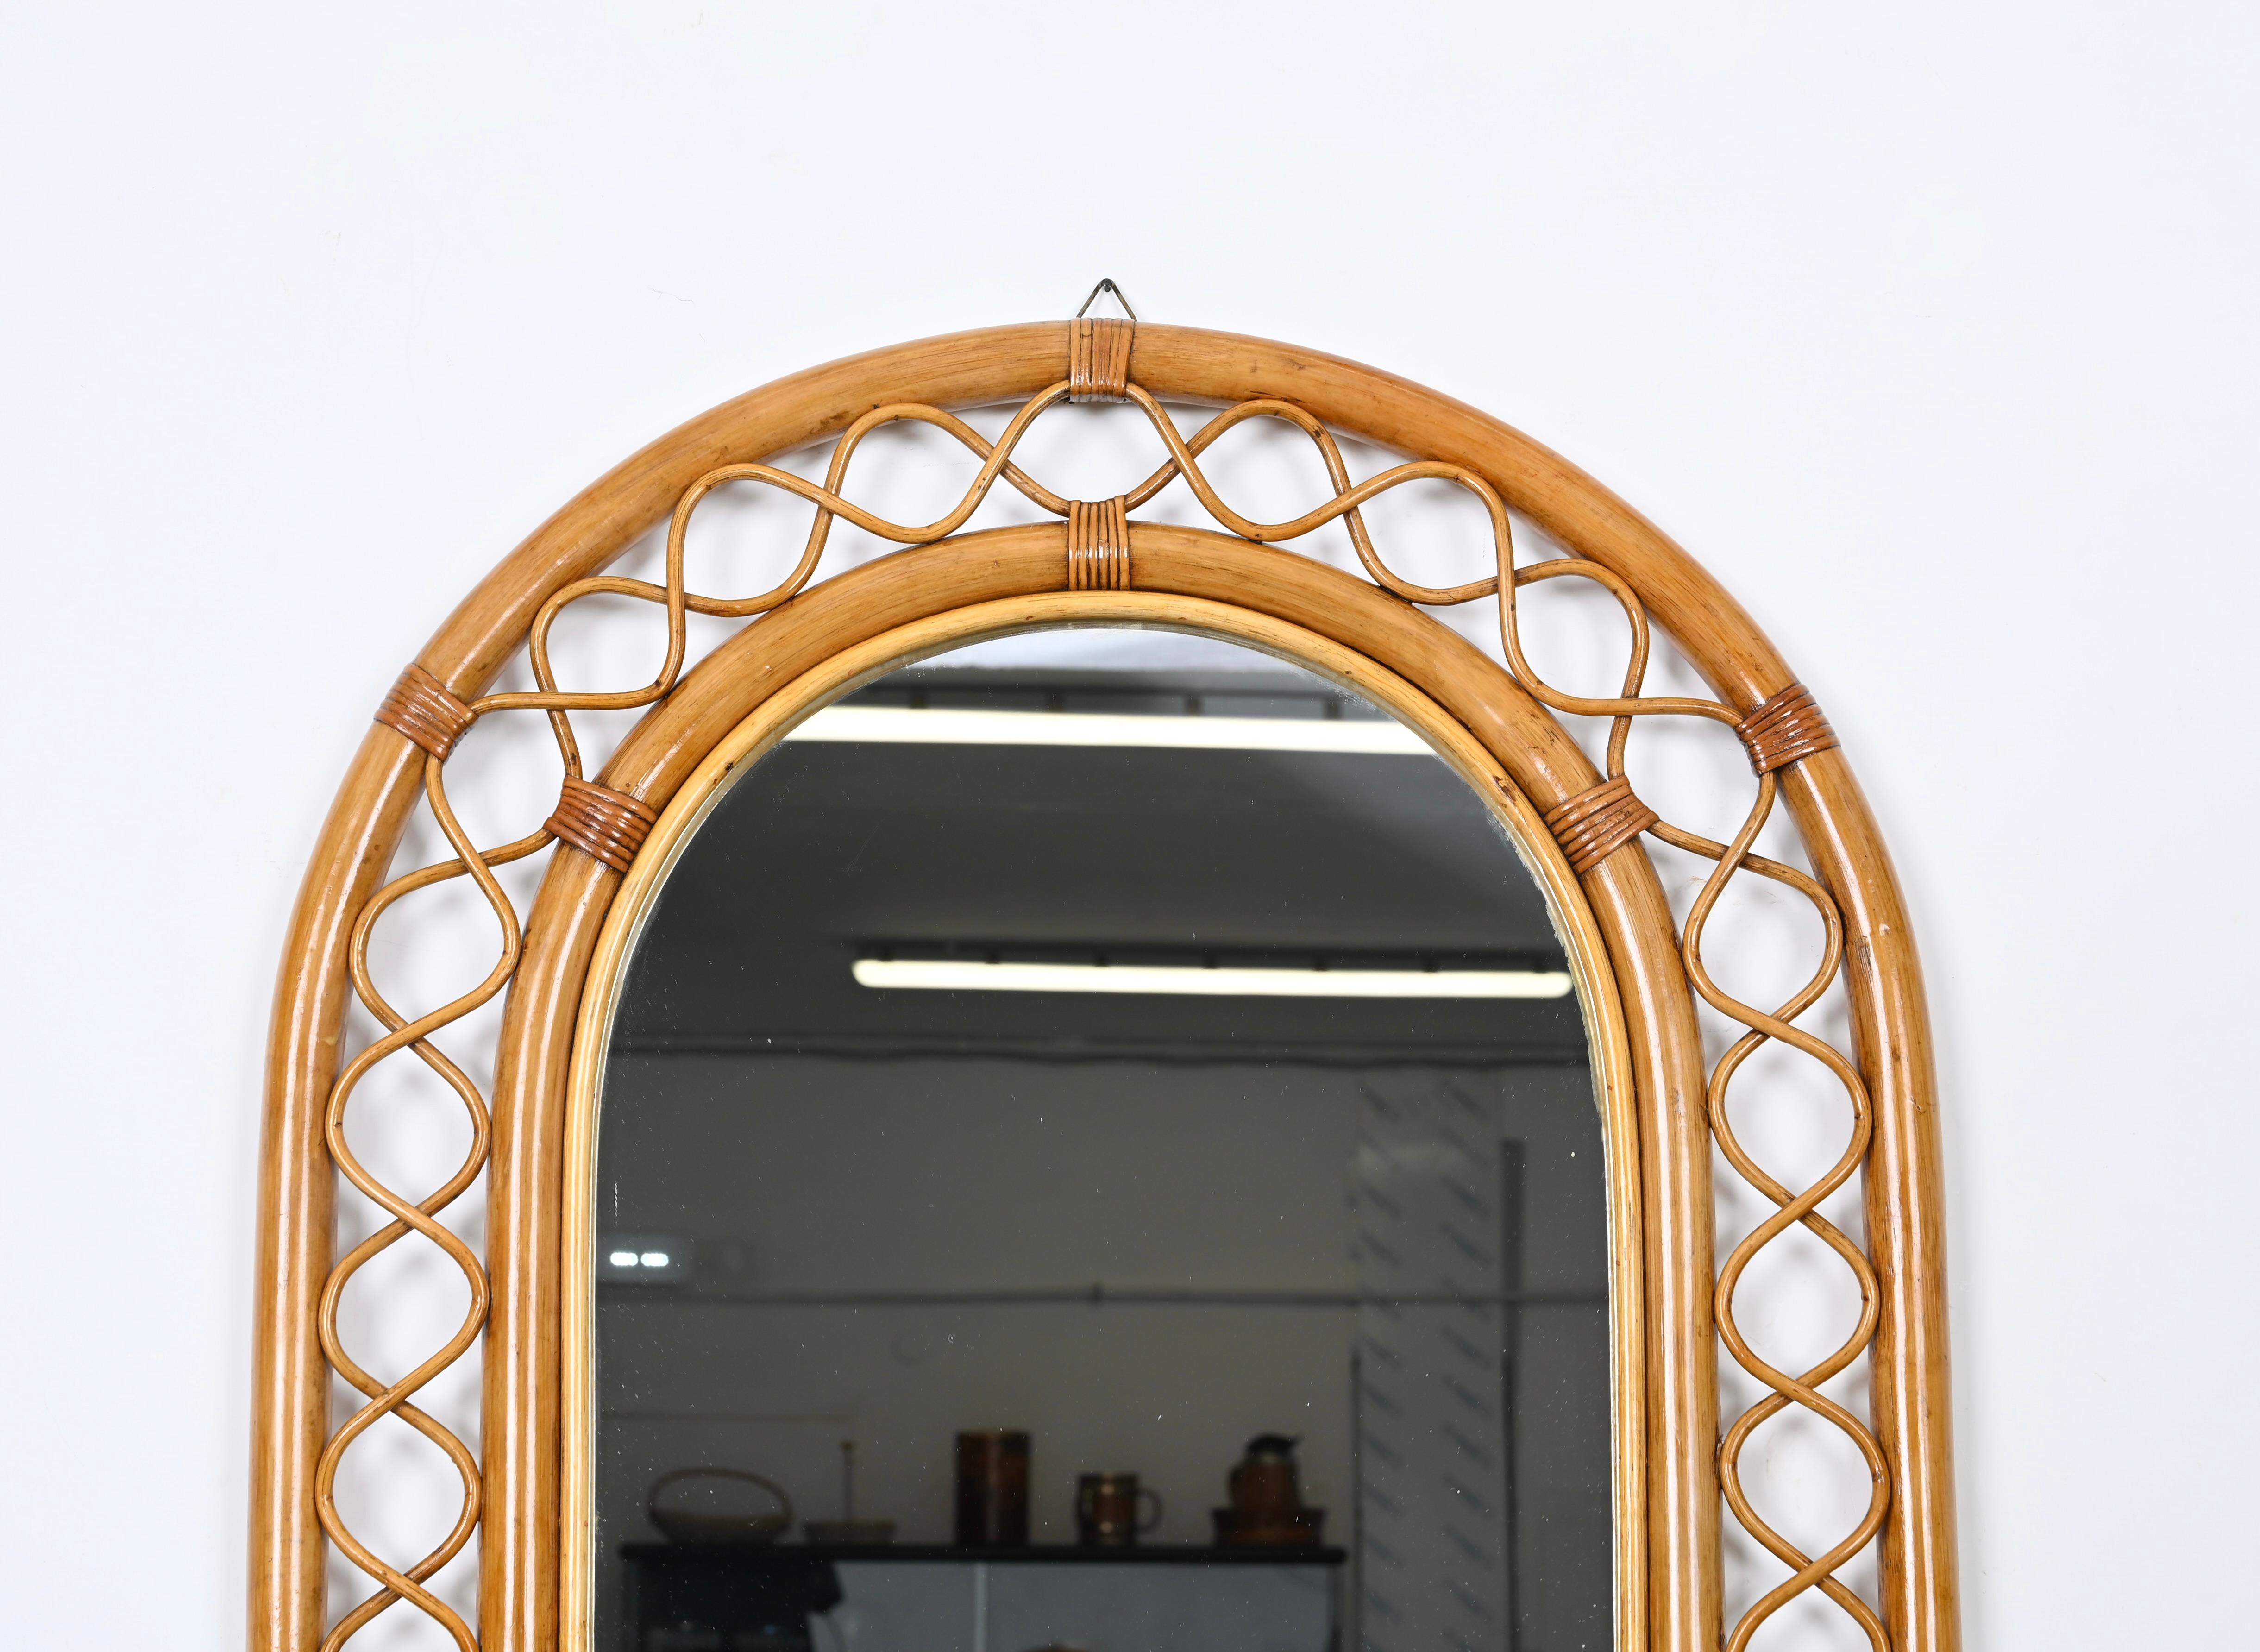 French Riviera Arch Mirror in Rattan, Wicker and Bamboo, Italy 1960s For Sale 4